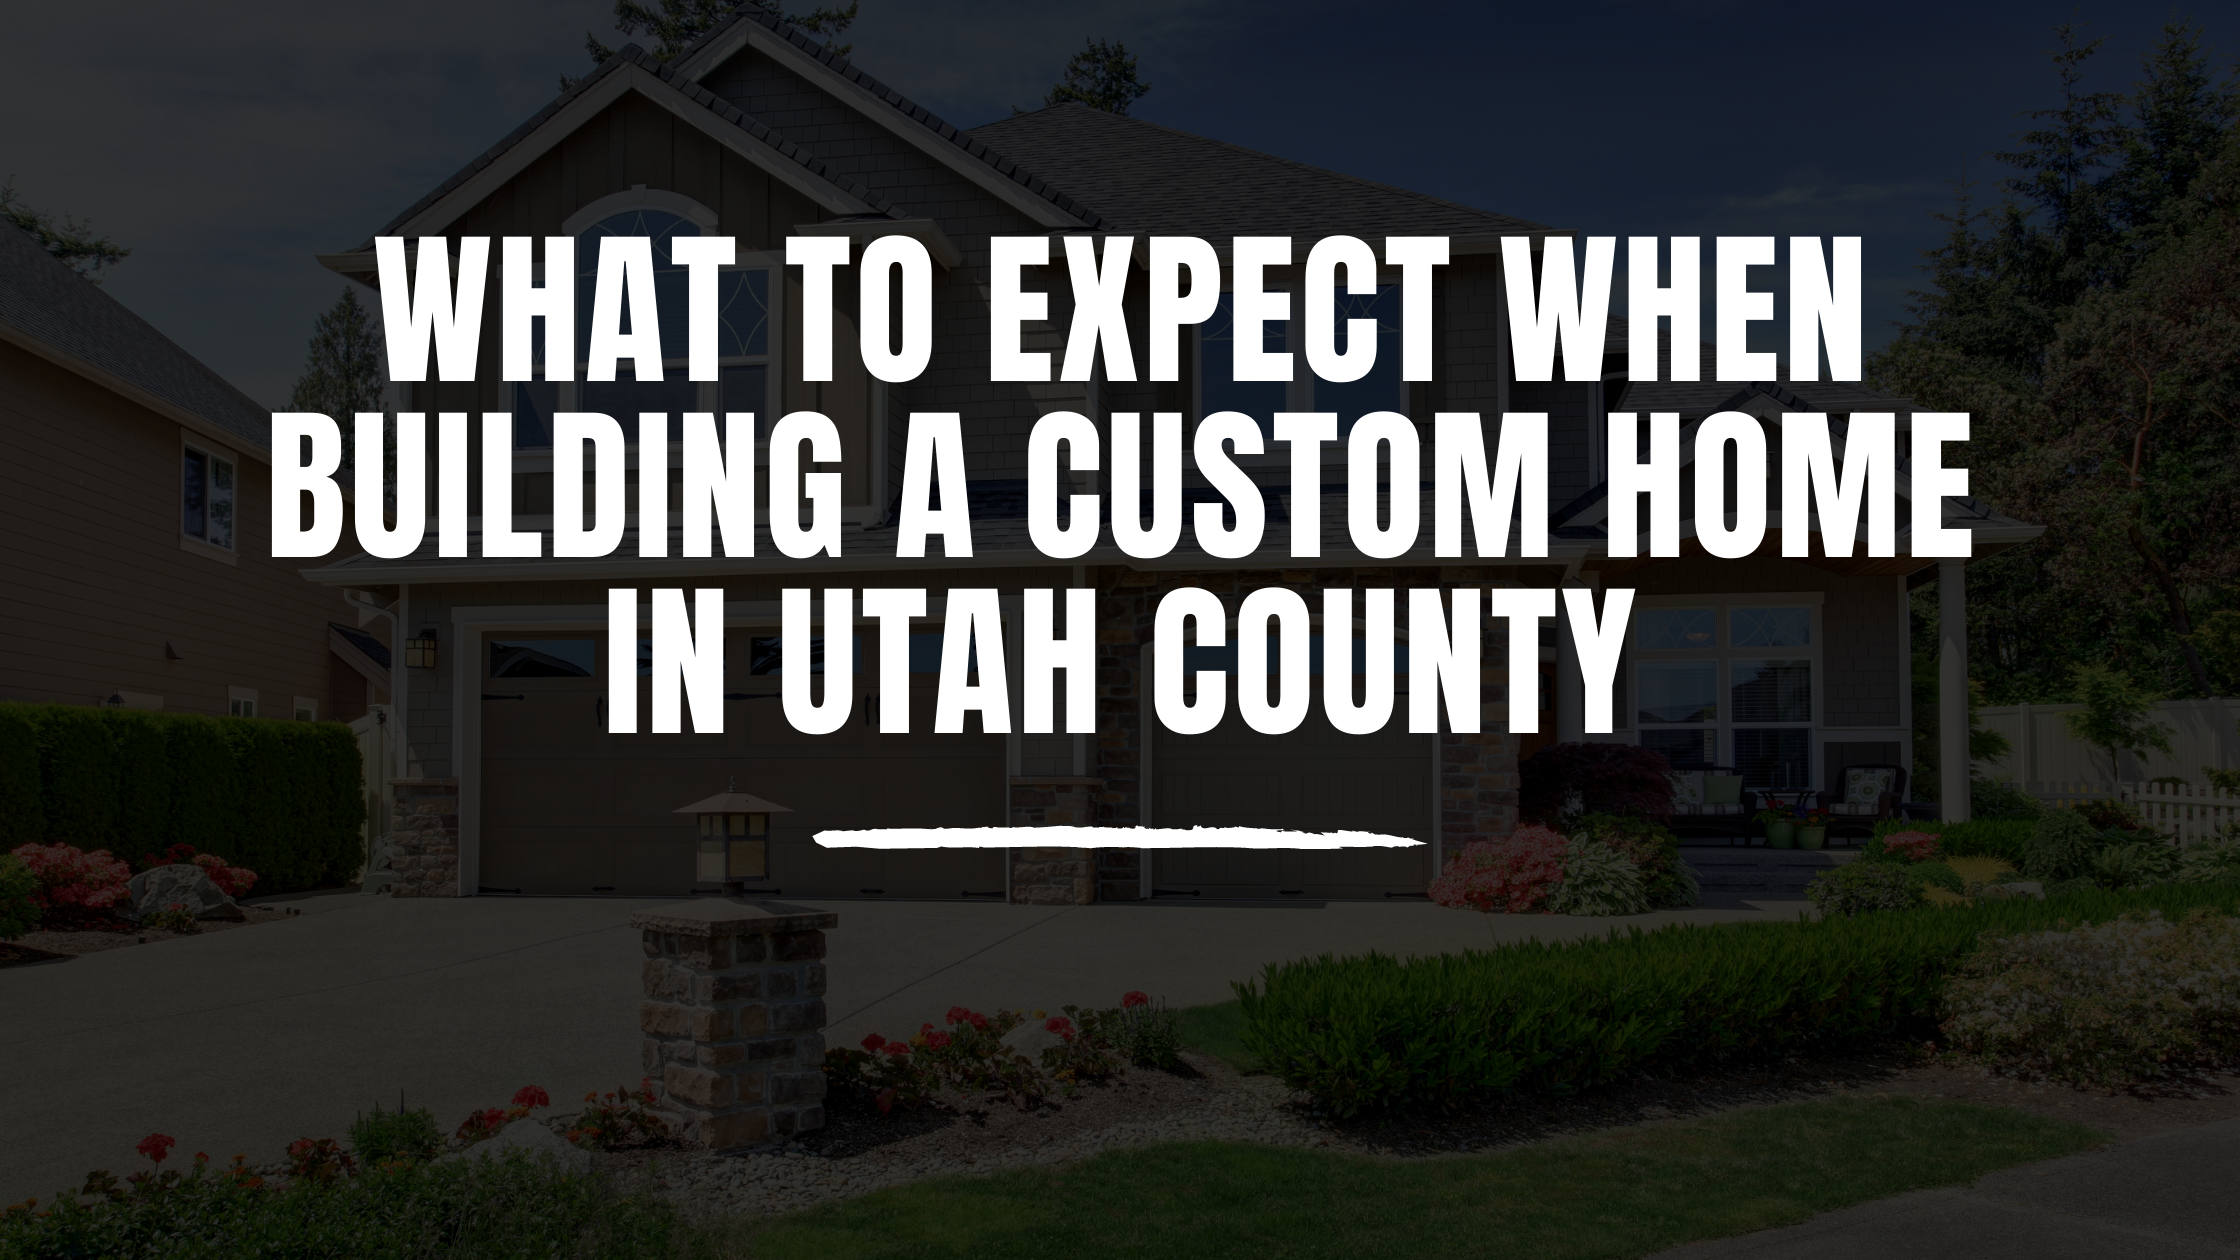 What to Expect when Building a Custom Home in Utah County